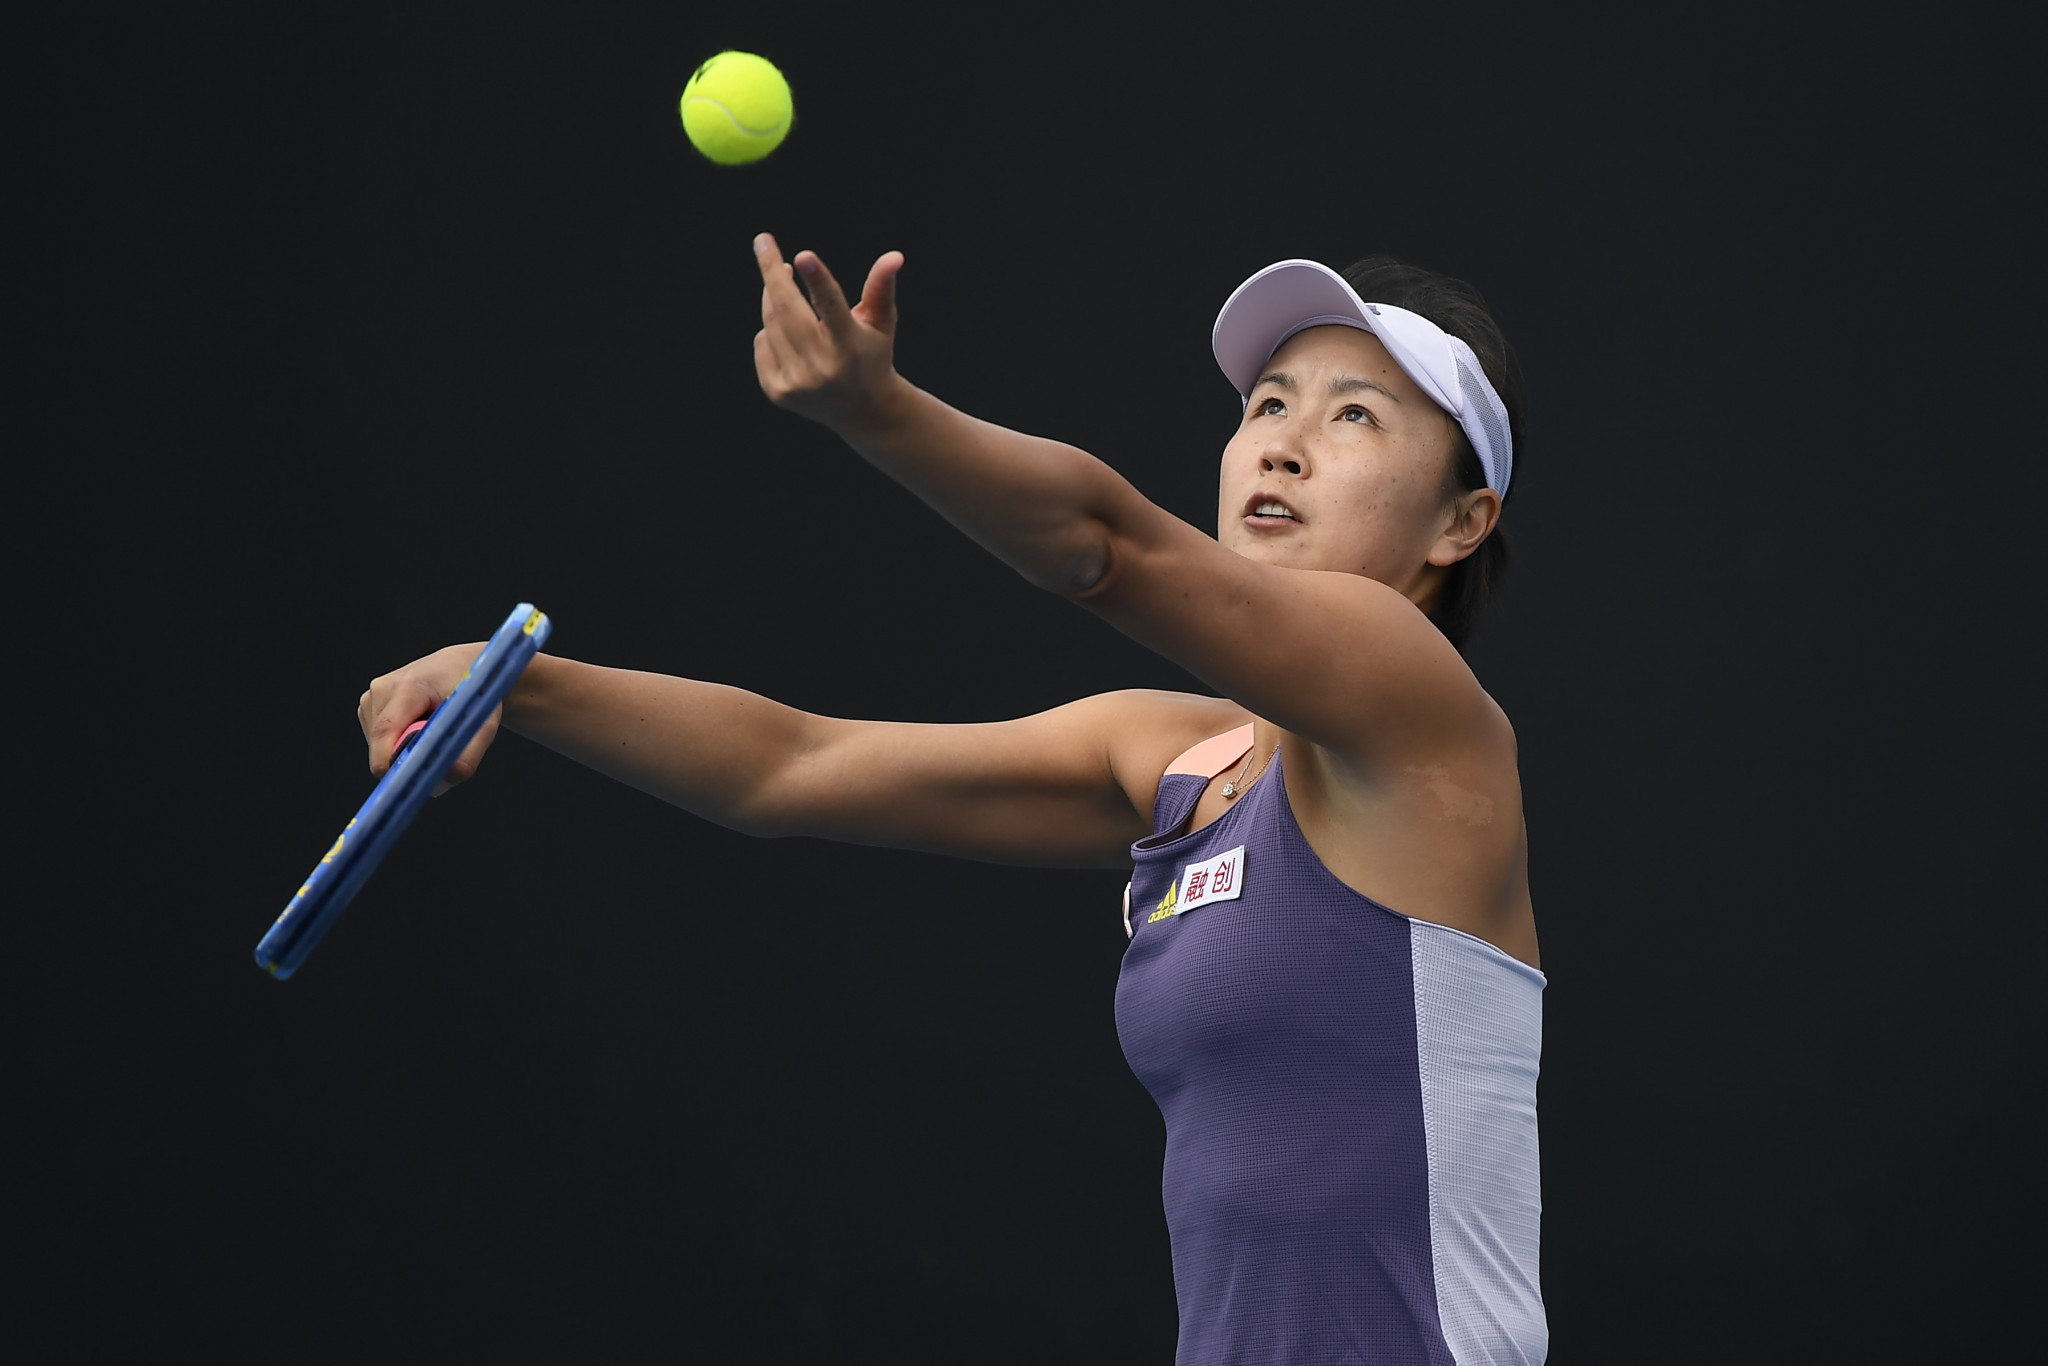 Concerns remain over the safety of Chinese tennis player Peng Shuai ©Getty Images